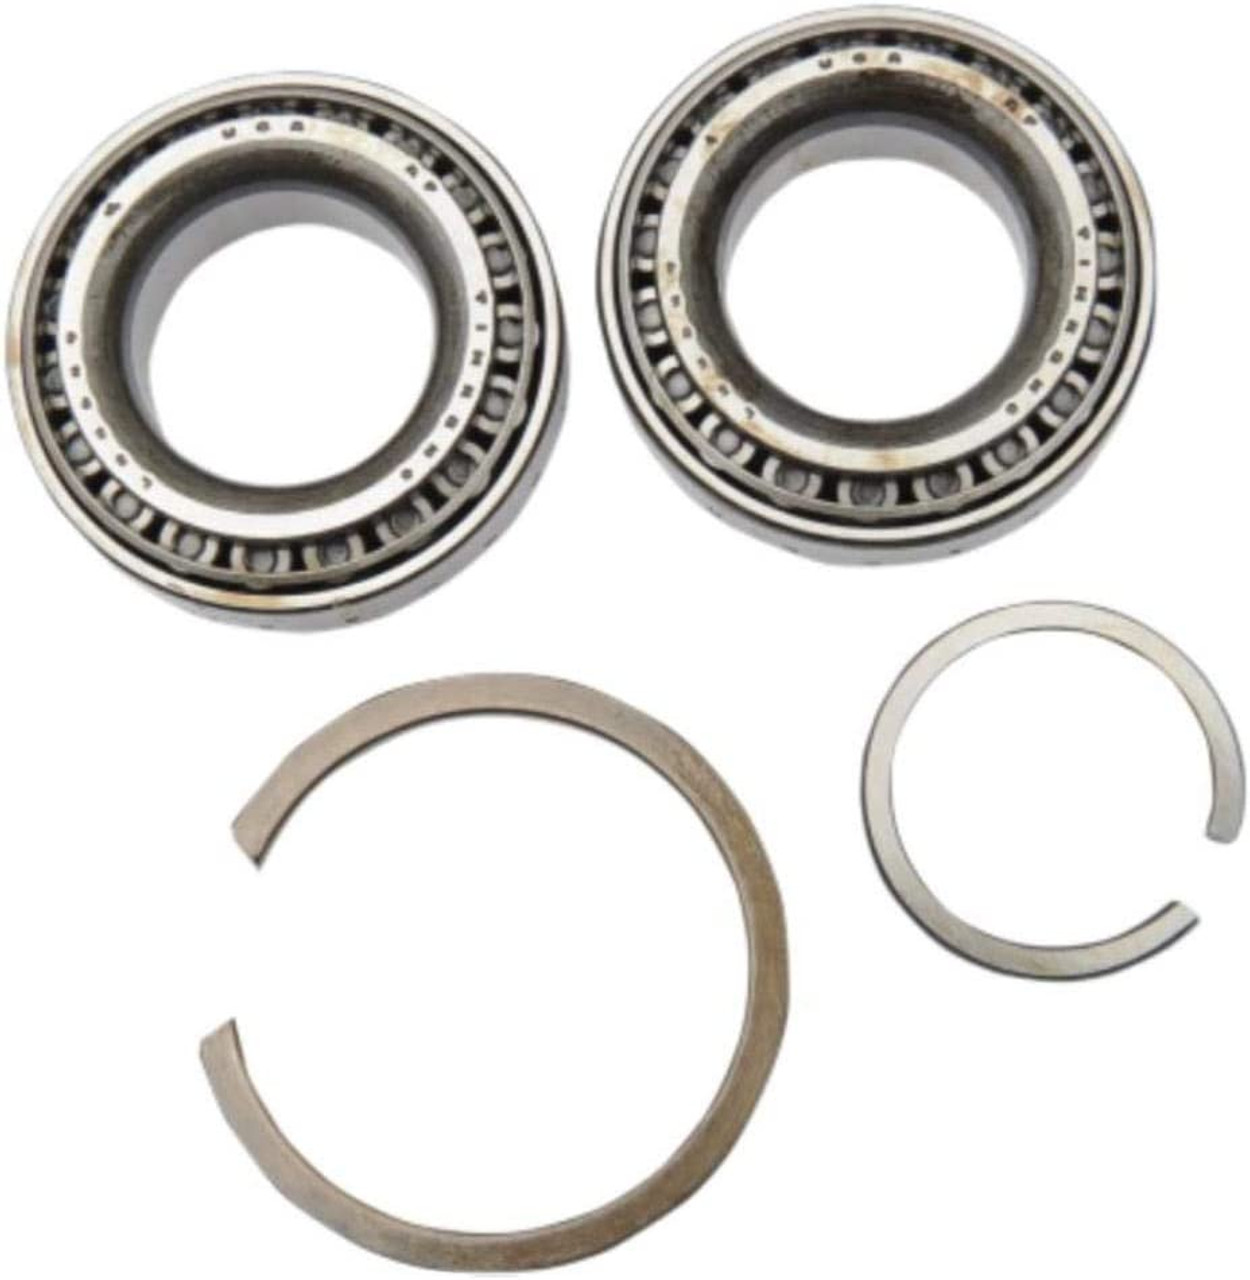 Eastern Motorcycle Parts A-24729-74A